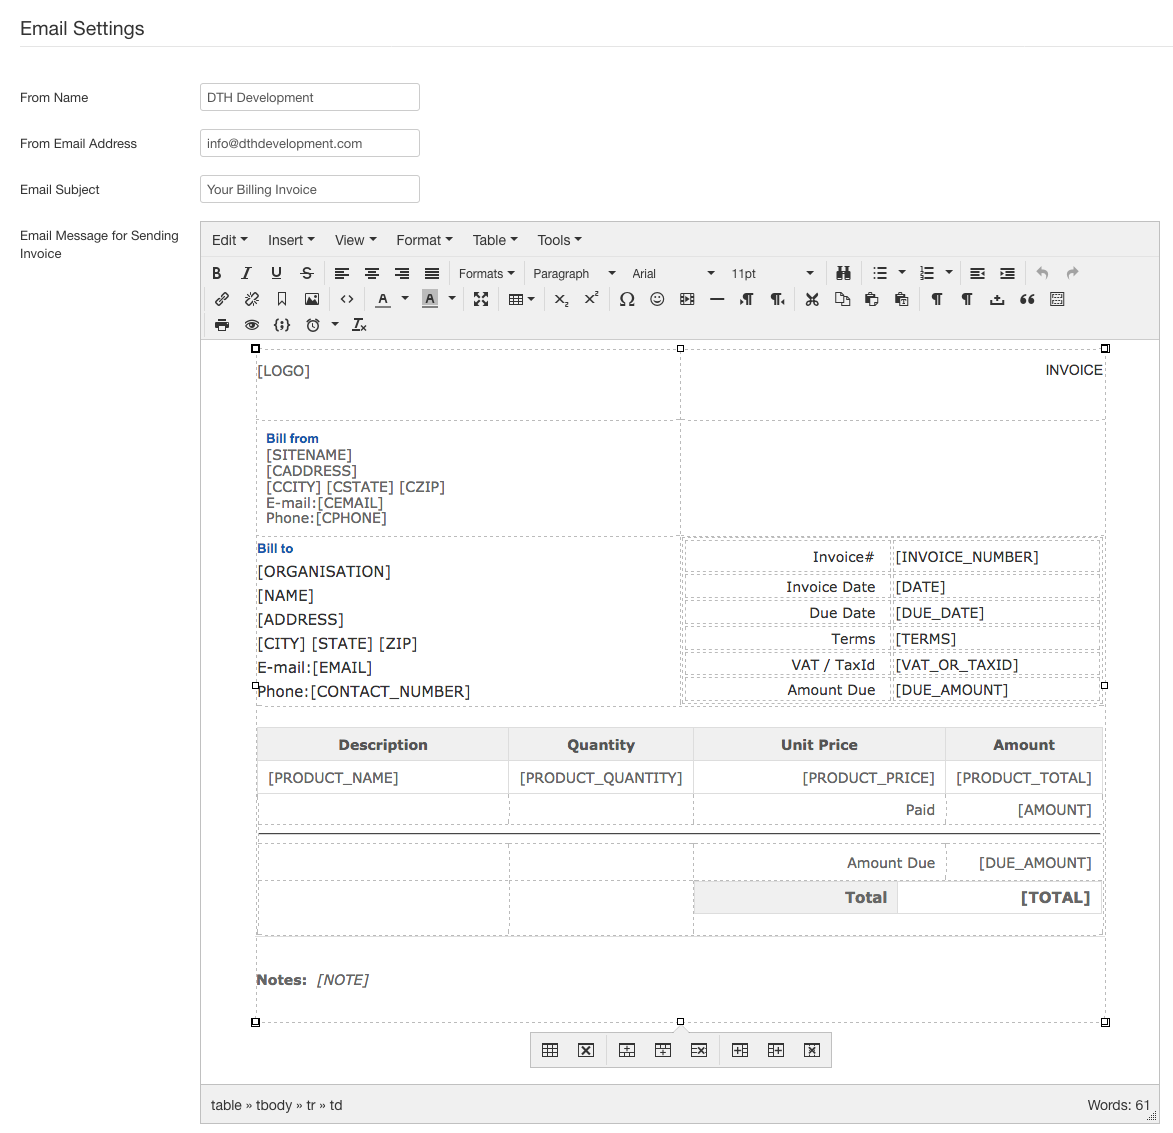 dt register Invoice Email Configurations